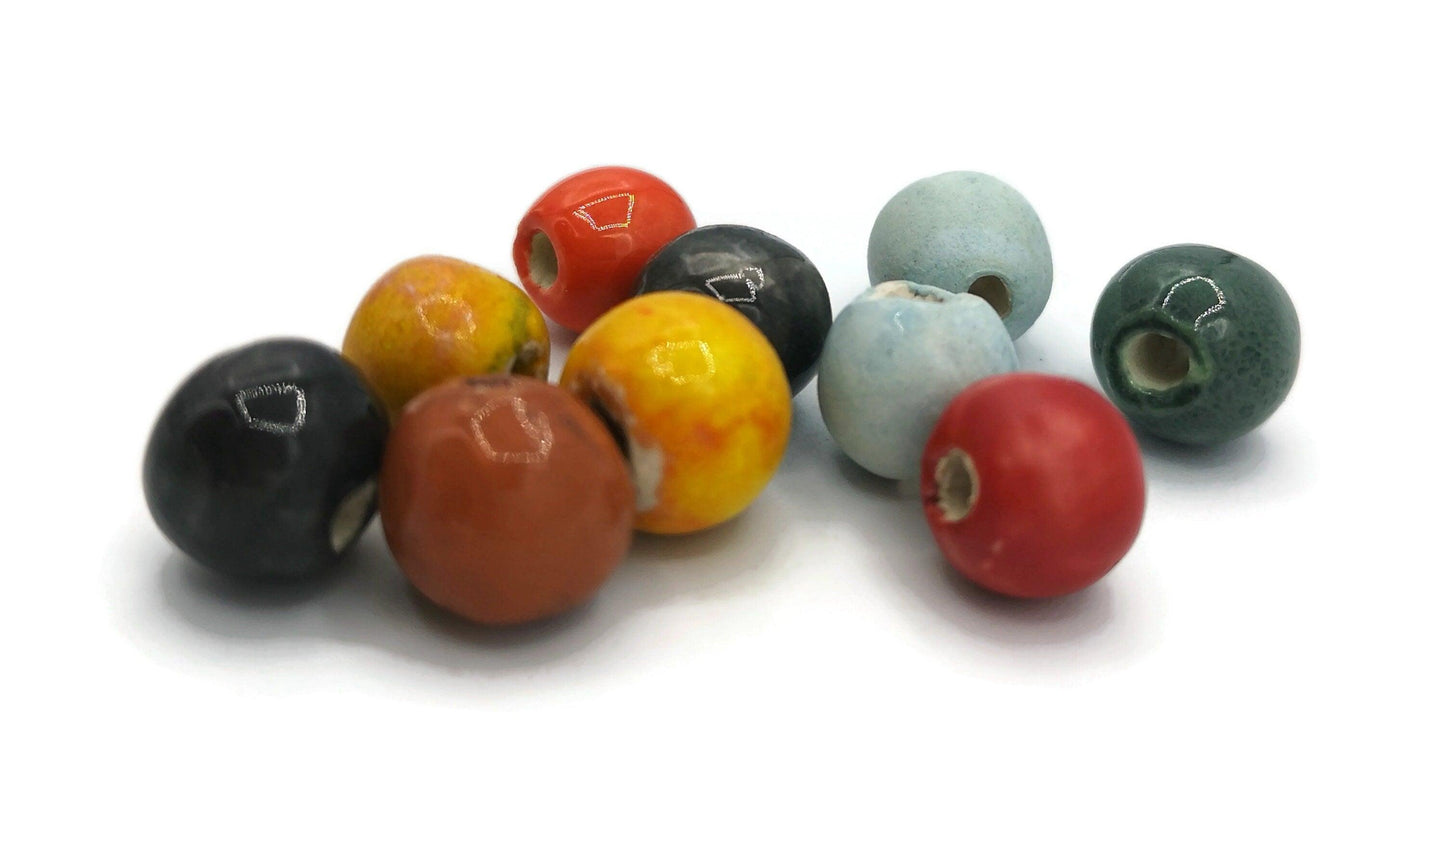 10Pc Round Assorted Beads Set, Handmade Ceramic Beads For Jewelry Making, Unique Artisan Clay Beads For Macrame Smooth And Durable Supplies - Ceramica Ana Rafael